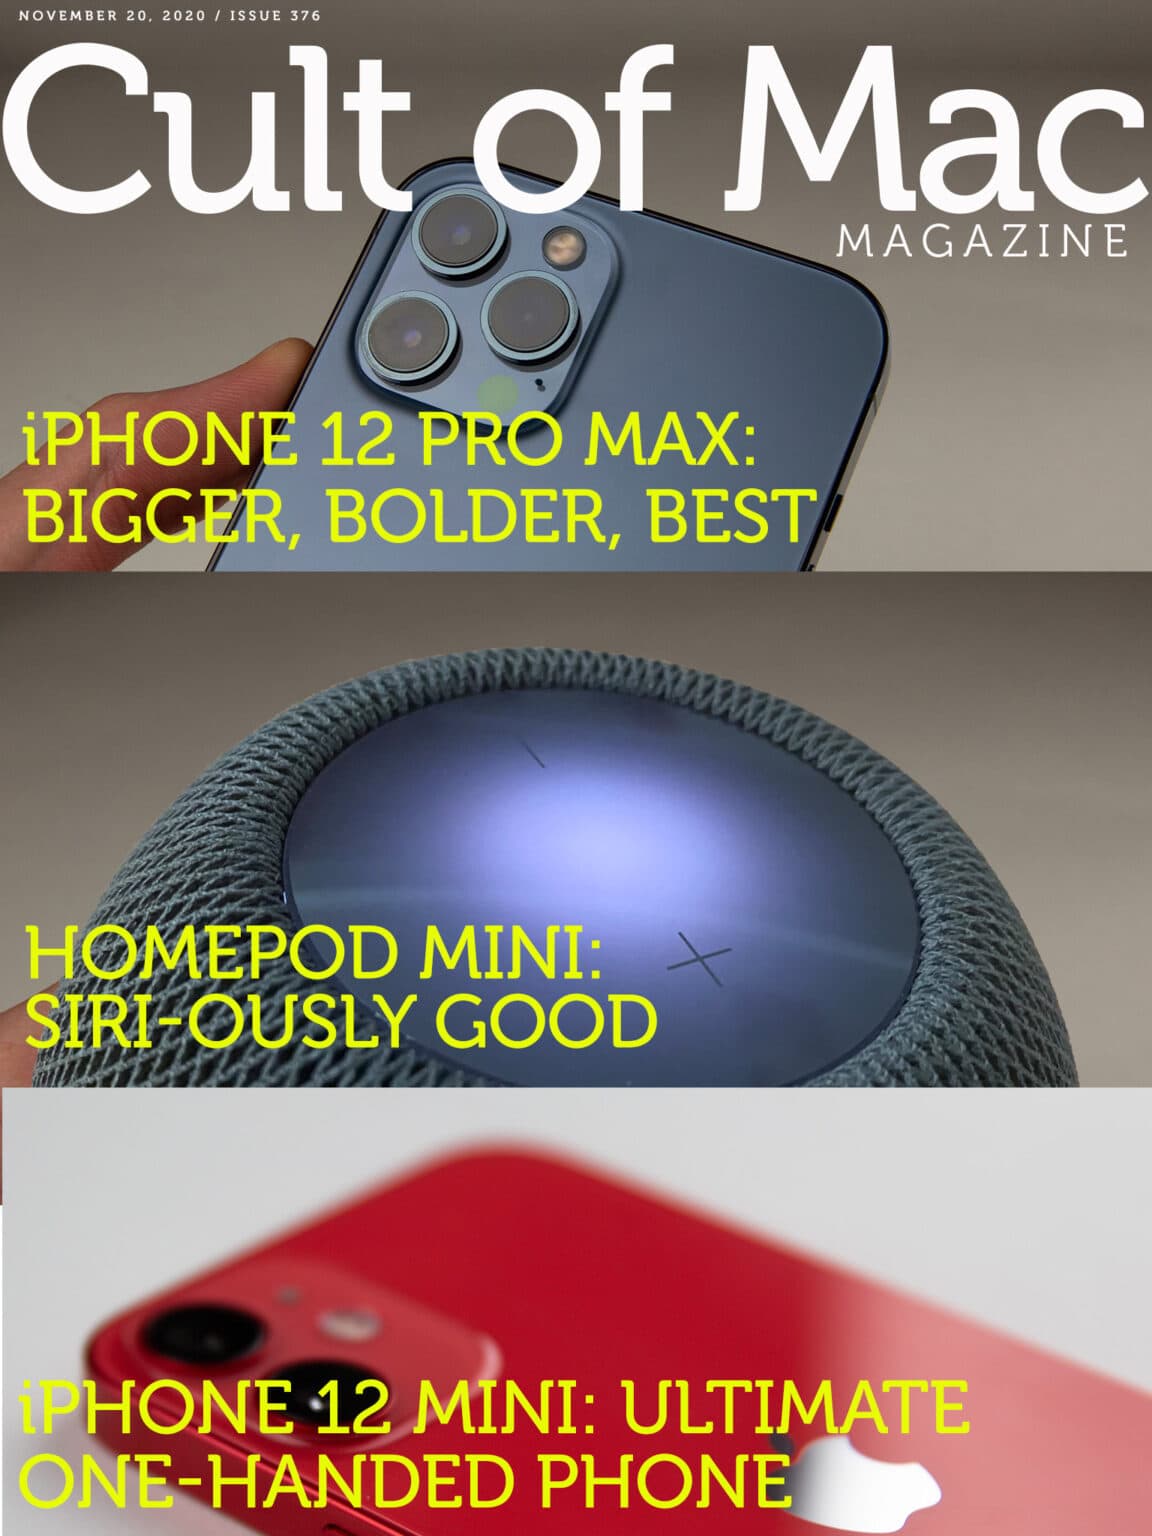 iPhone 12 Pro Max, iPhone 12 mini and HomePod mini reviews: So many Apple products, so little time ...